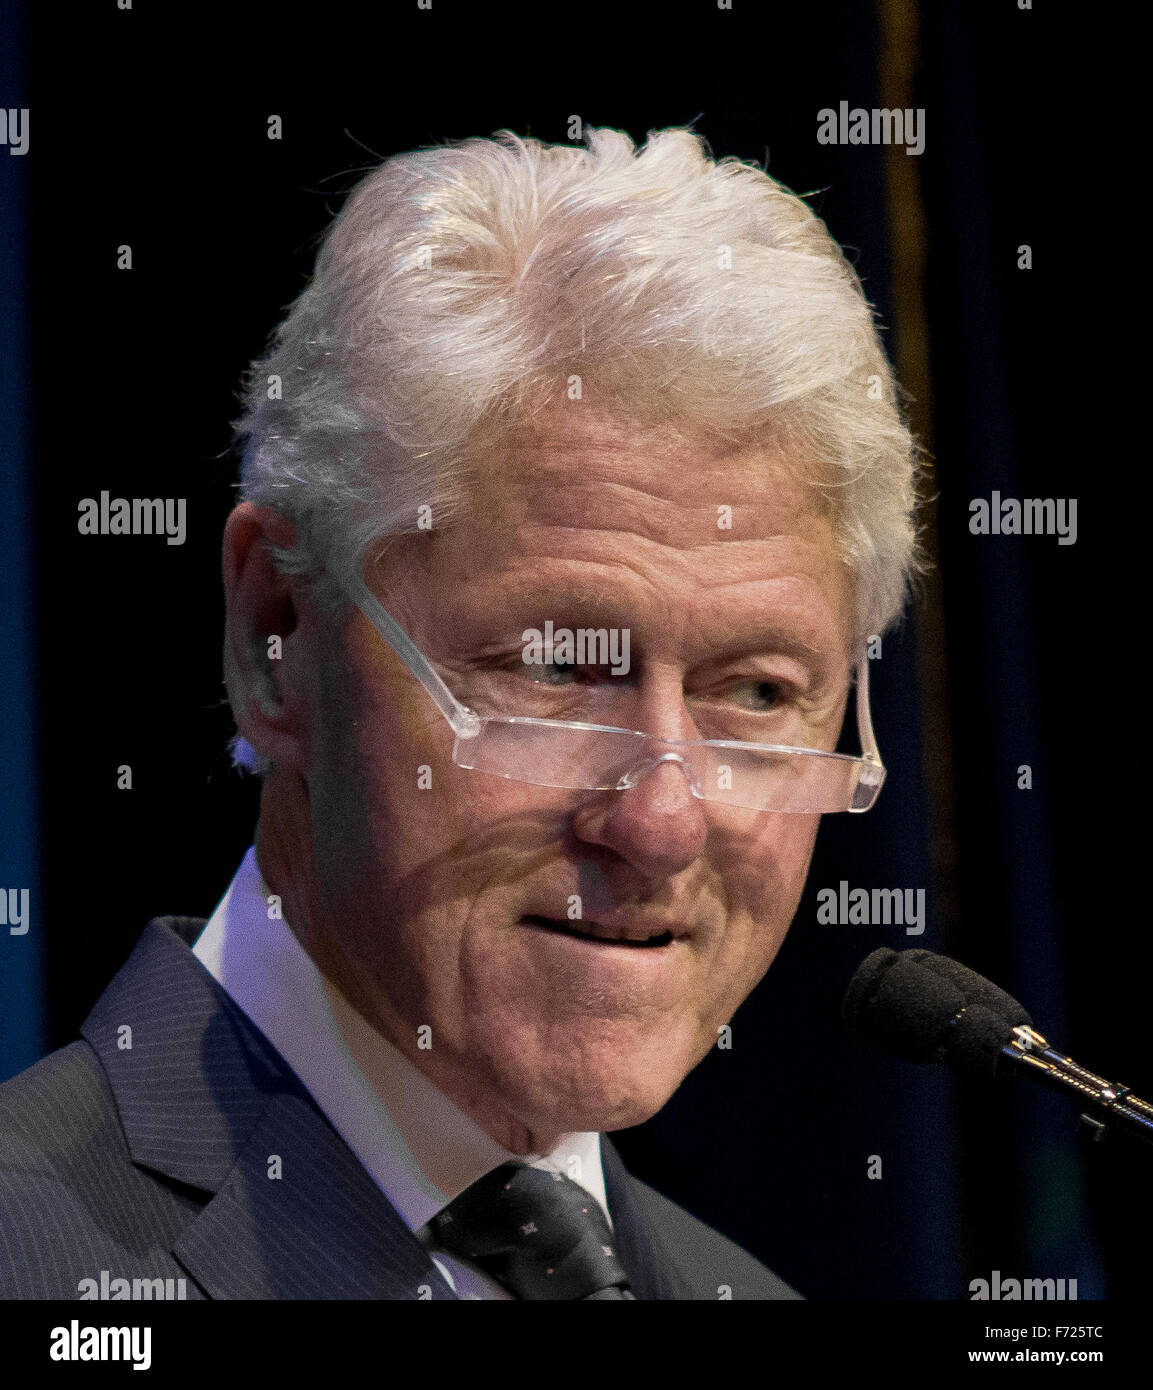 Lawrence, Kansas. 23rd Nov, 2015. Former President William Jefferson Clinton is awarded the Robert J. Dole Institute of Politics Leadership Prize. President Clinton is honored with the award for his legacy of bipartisanship and economic expansion while serving as the nations 42nd president. Credit: Credit:  mark reinstein/Alamy Live News Stock Photo